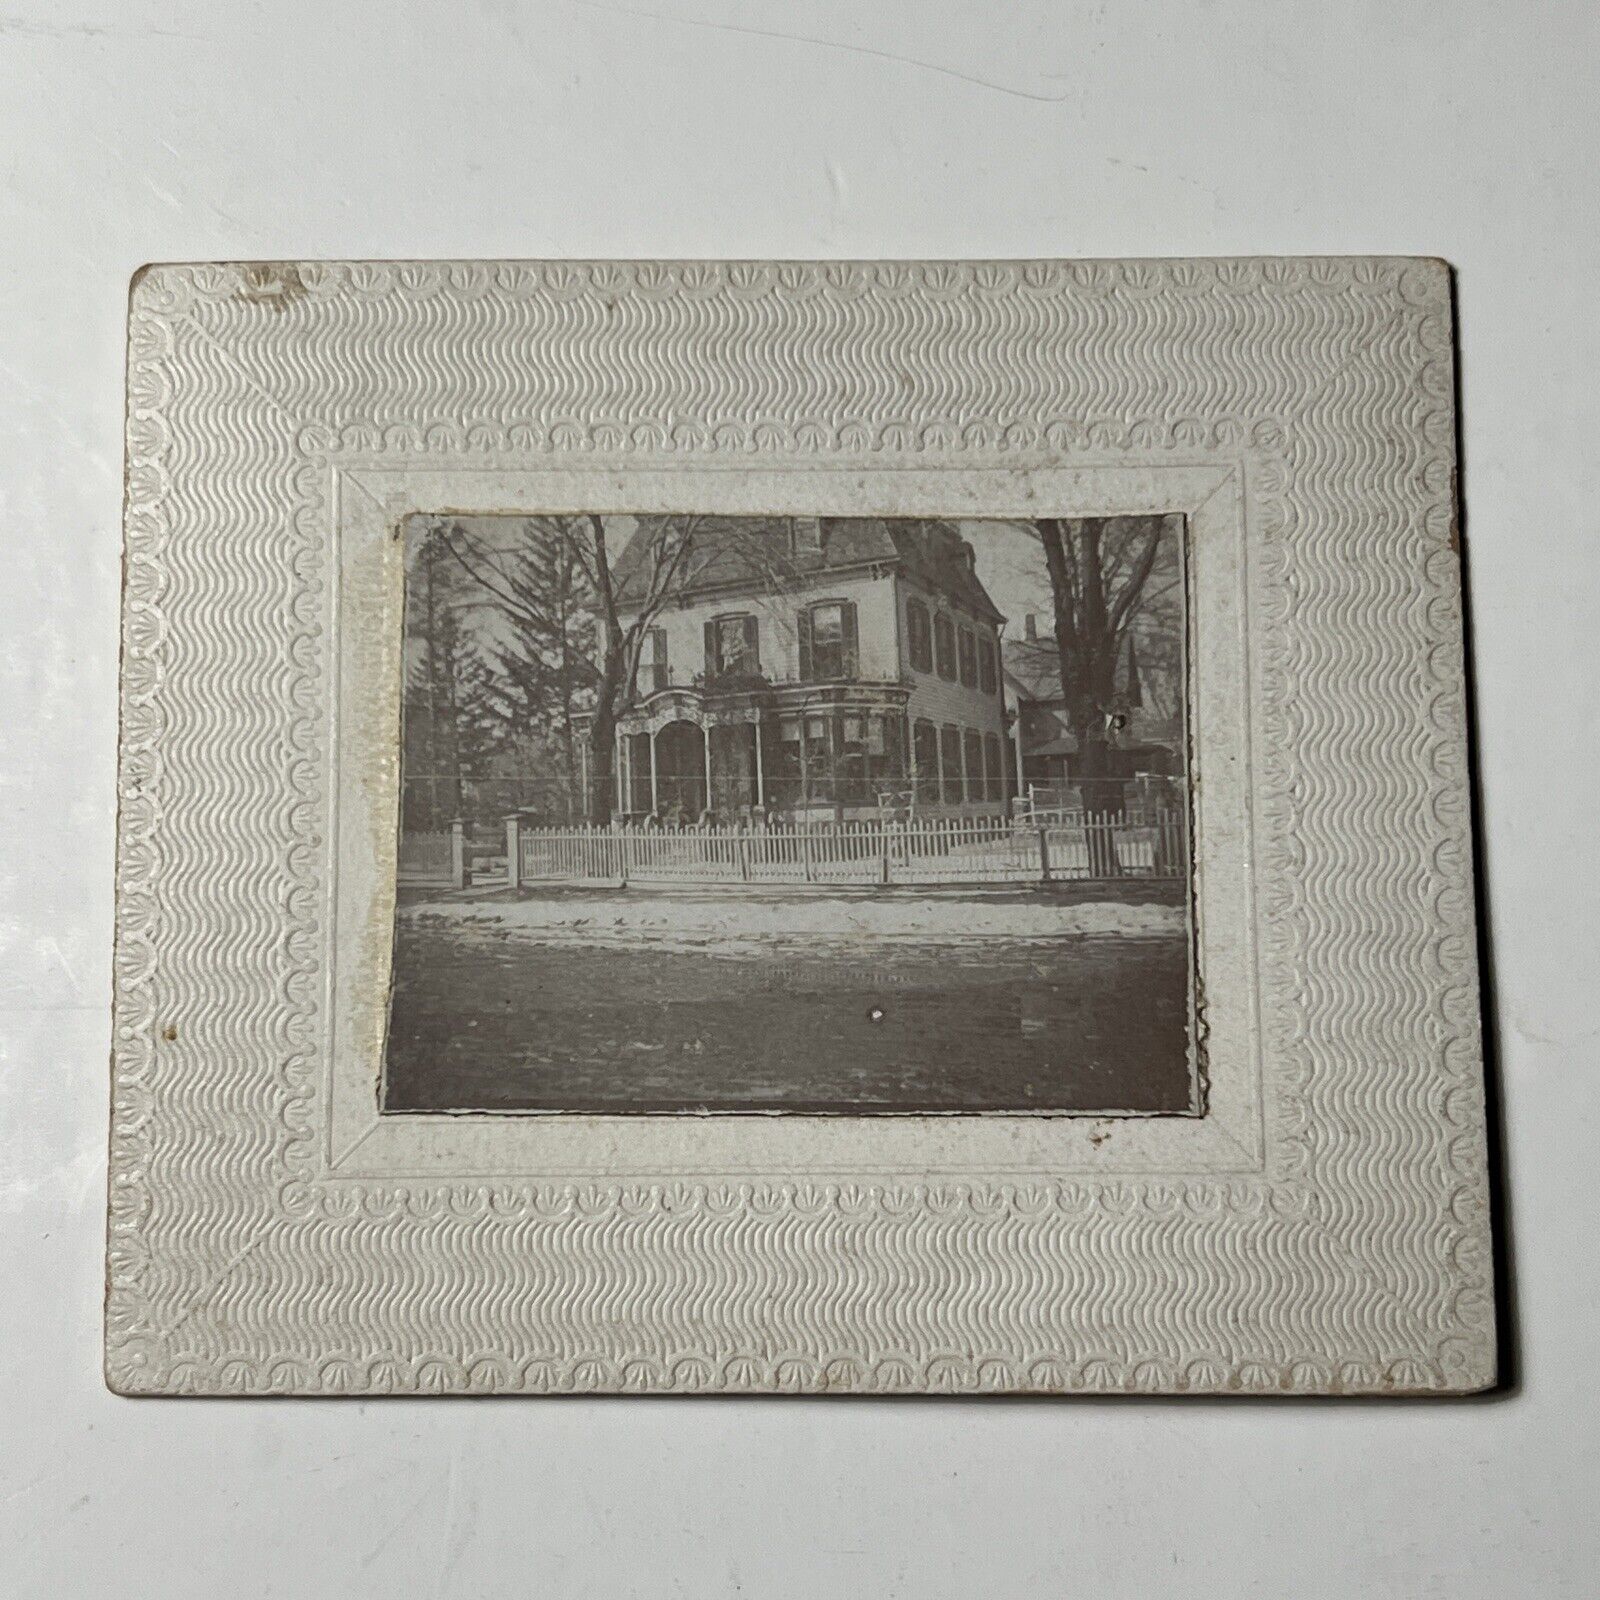 antique QUEEN ANNE style HOUSE miniature Cabinet Card Photo